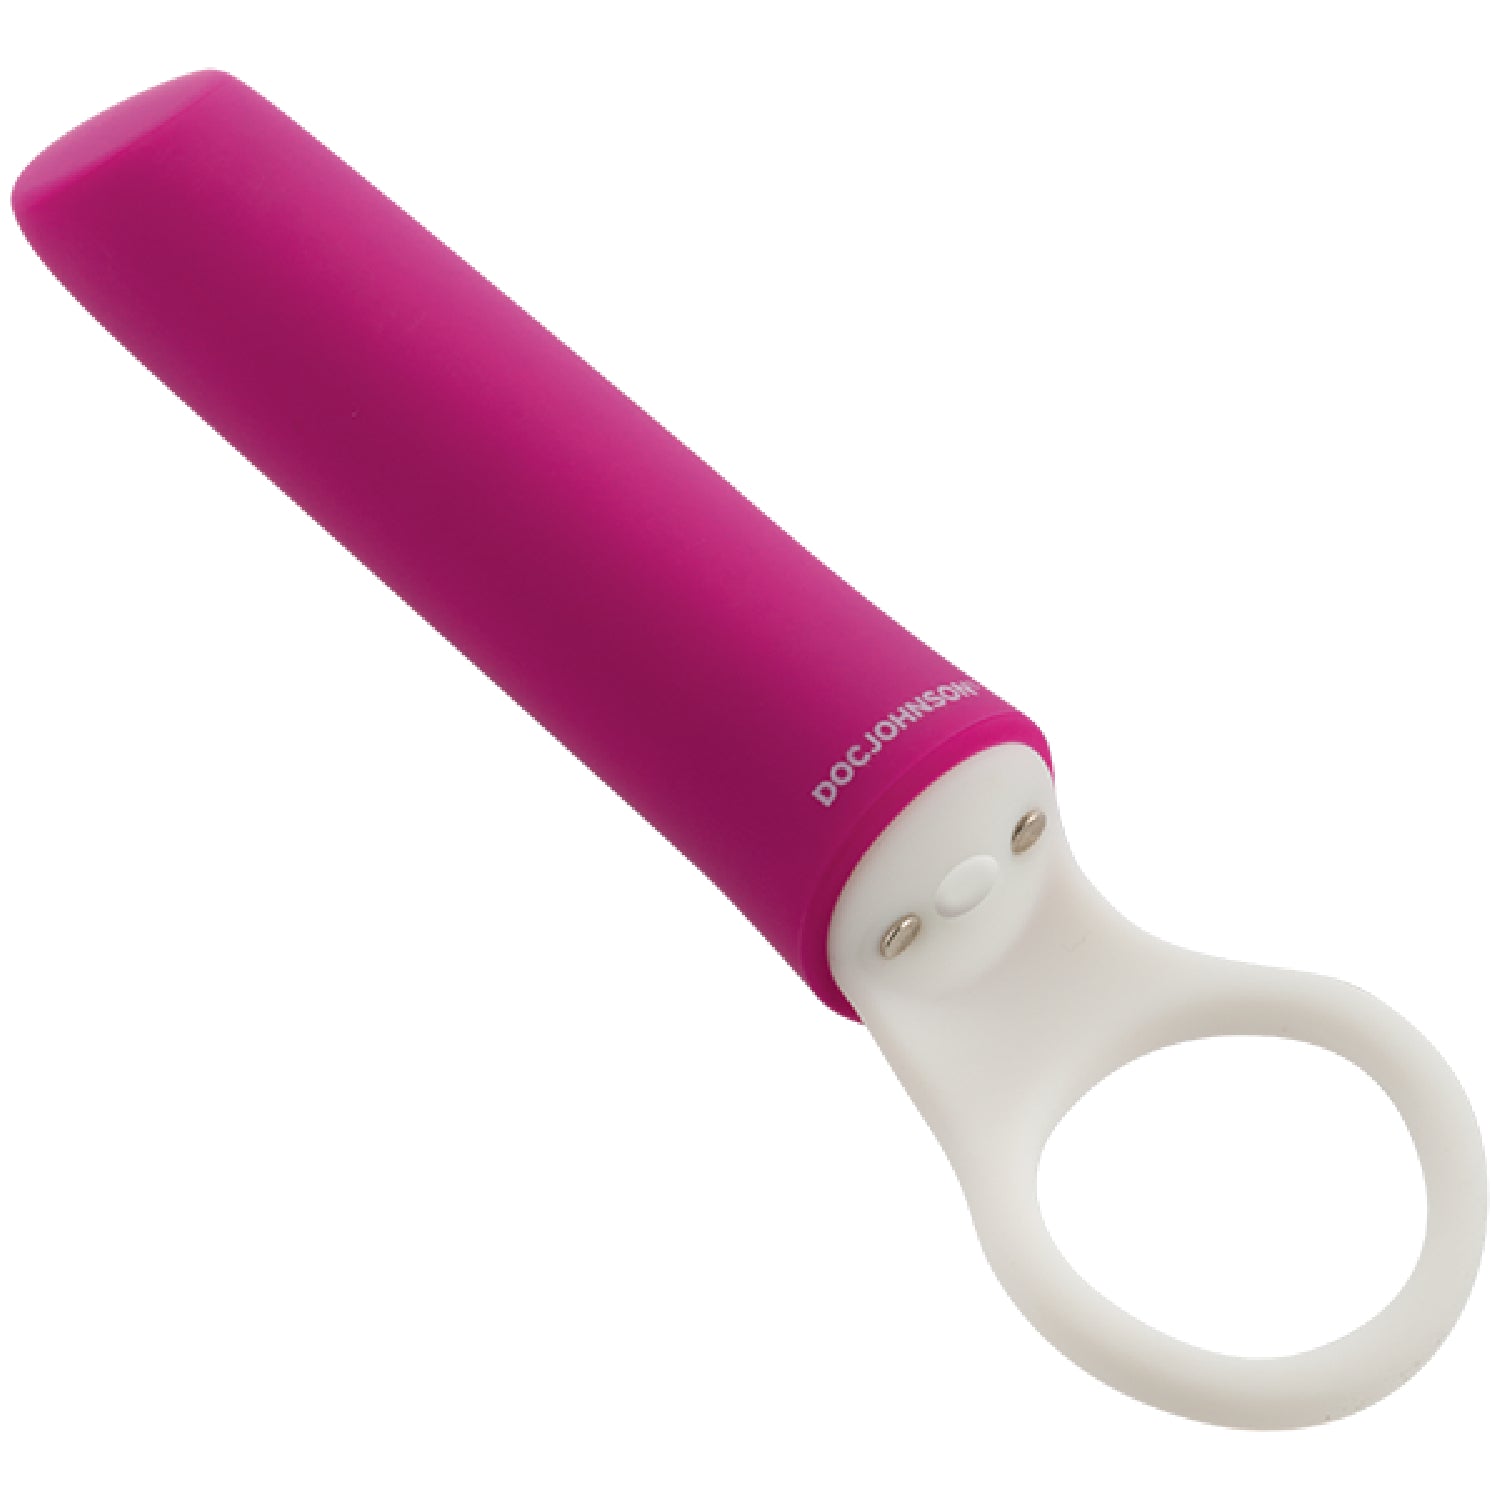 iVibe Select - iPlease - Multiple Colours